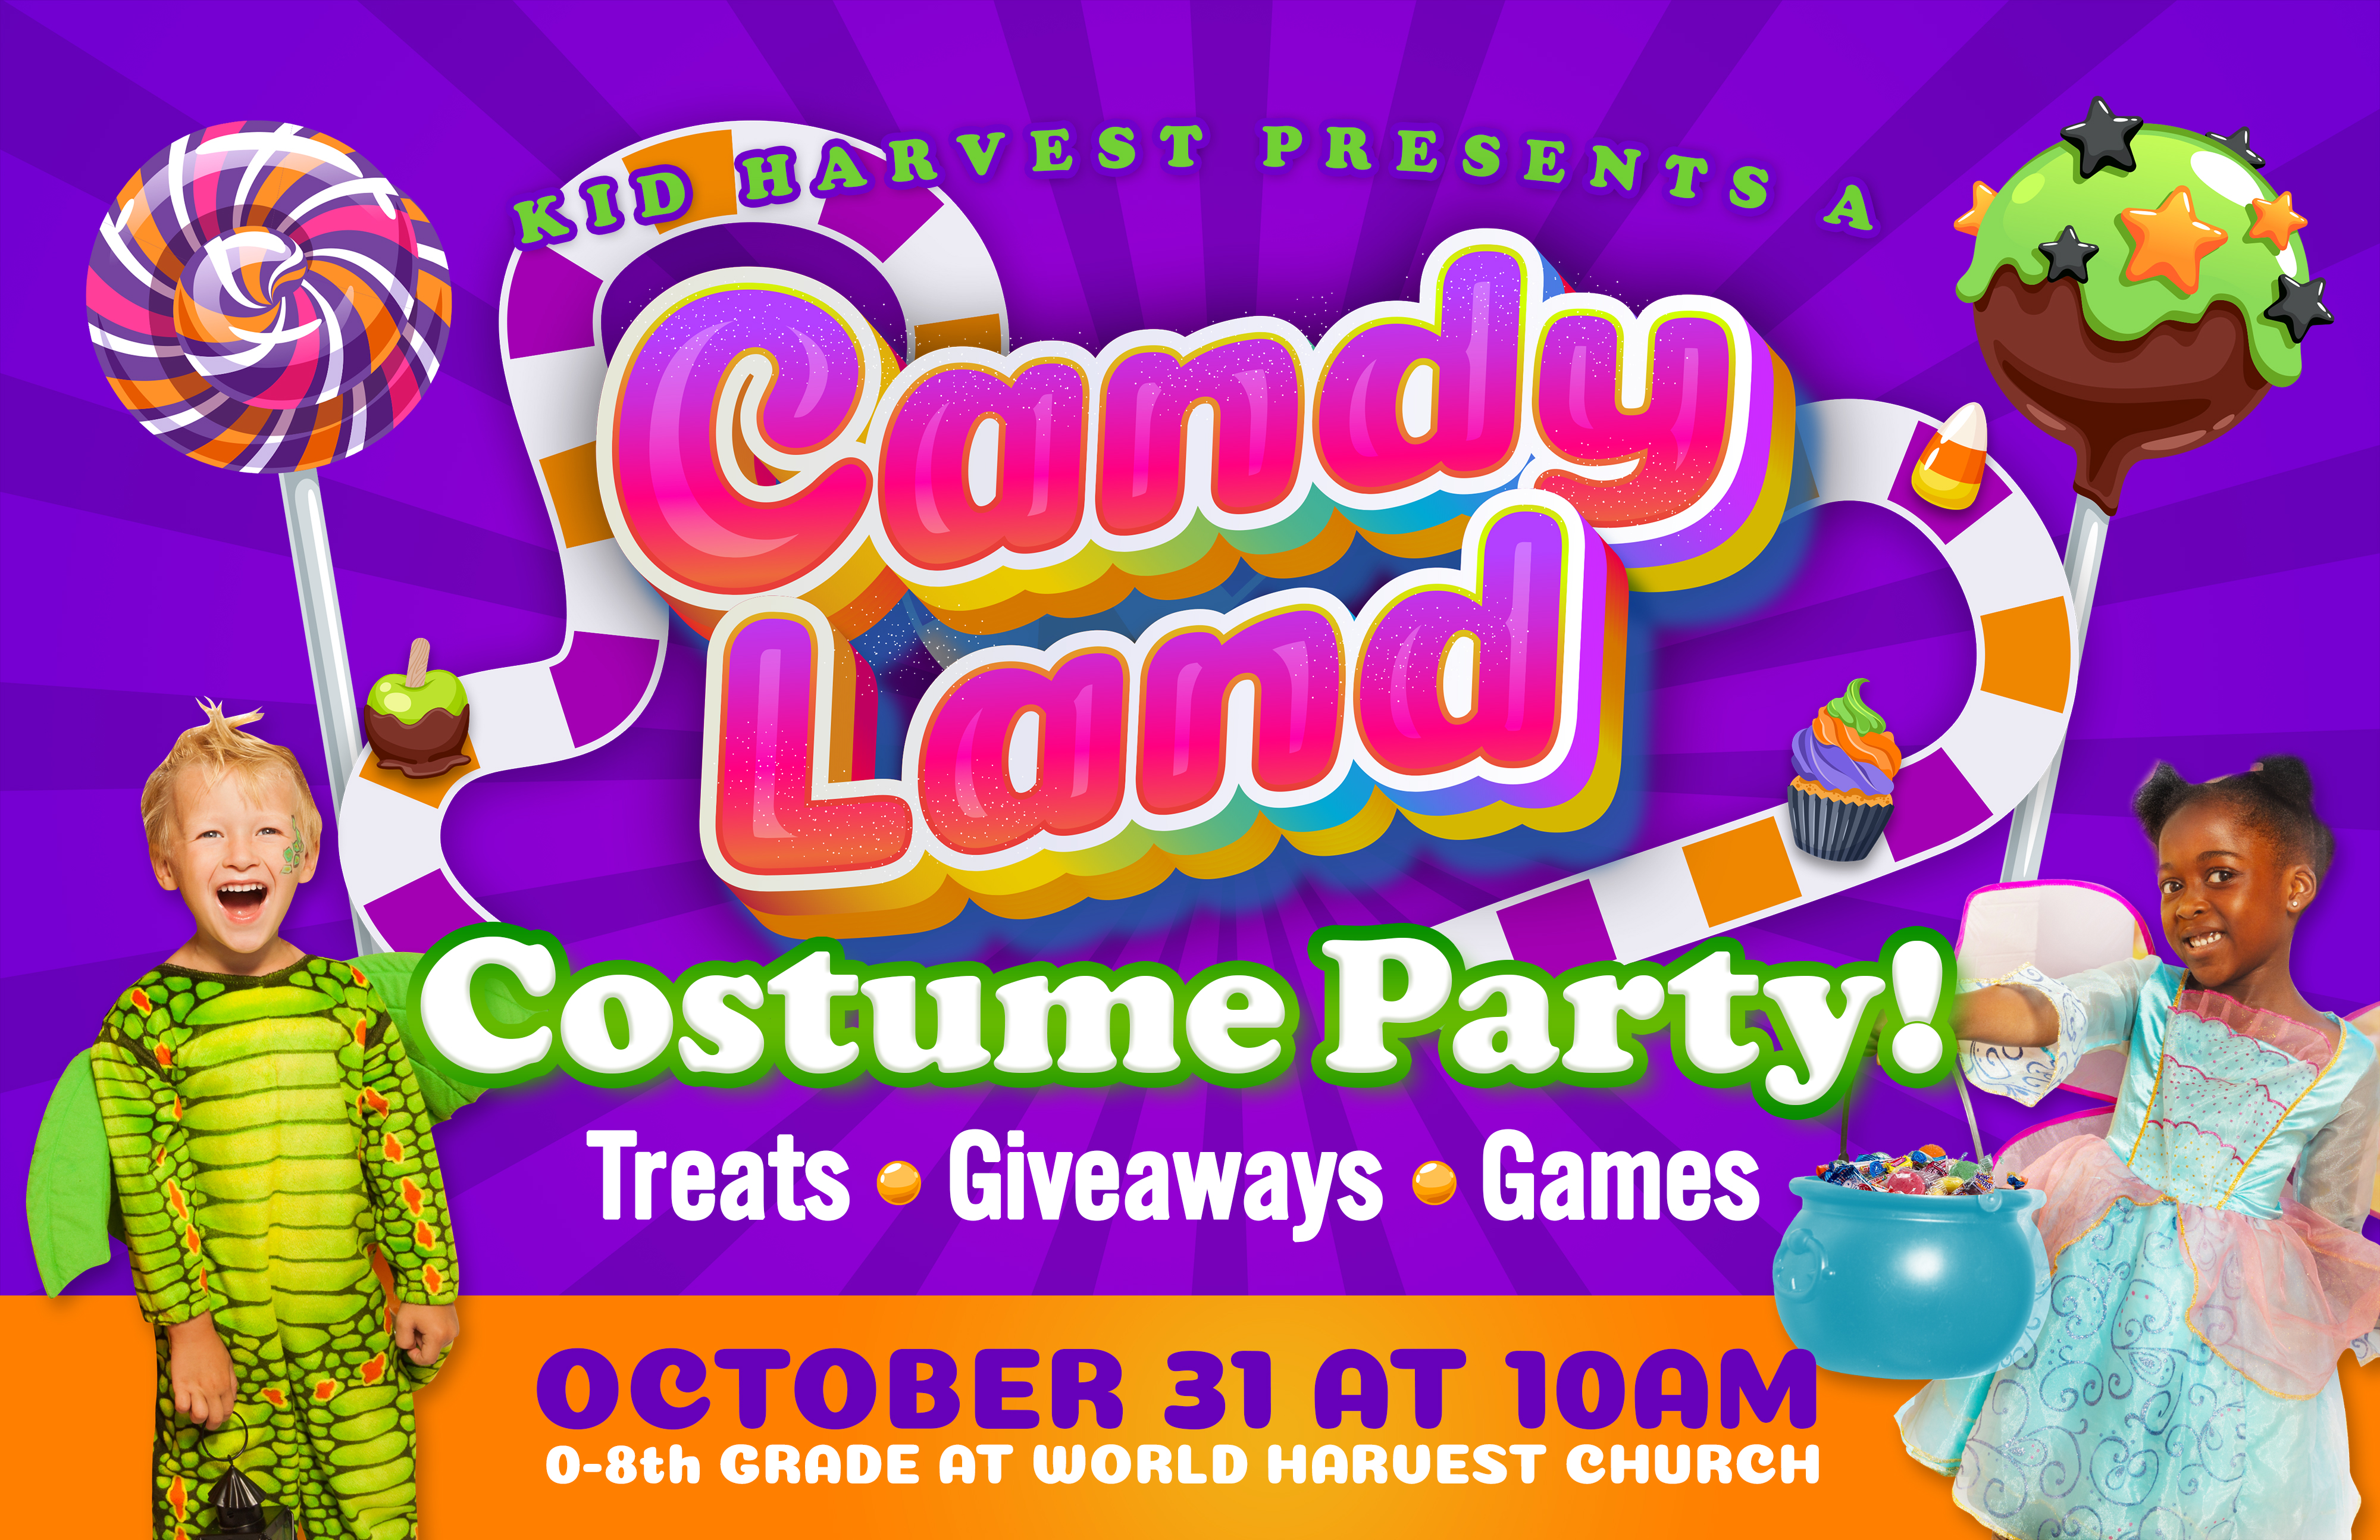 Kid Harvest Presents a Candy Land Costume Party! Treats Giveaways Games October 31 at 10AM 0-8th Grade at World HArvest Church